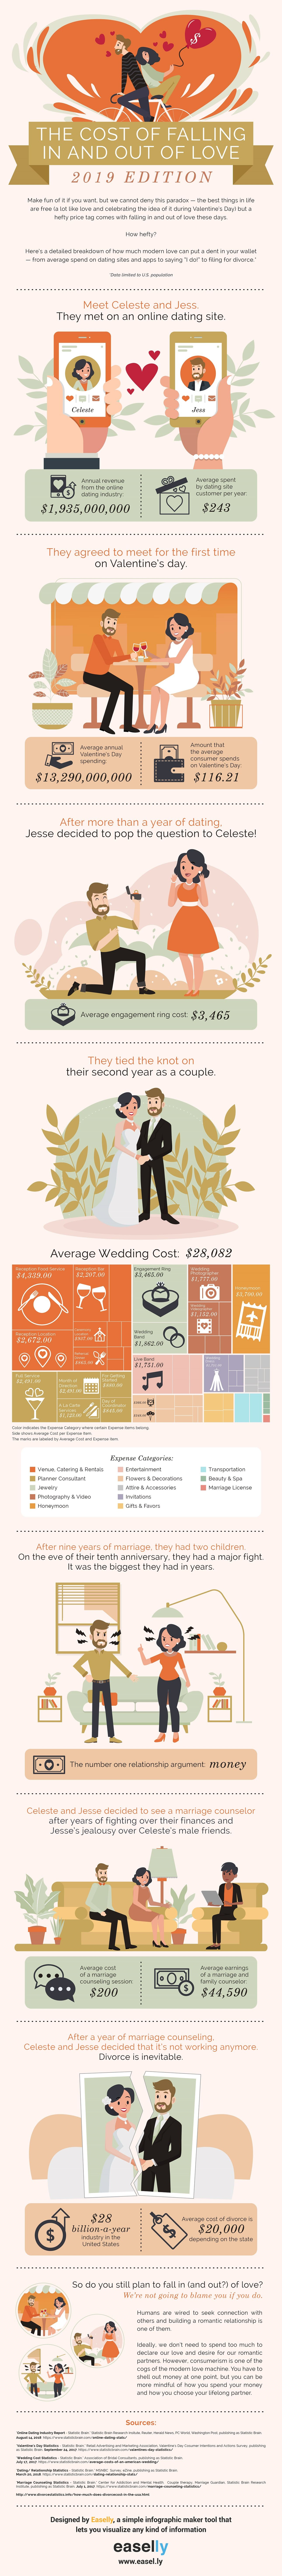 The Cost of Falling In and Out of Love: 2019 Edition #infographic